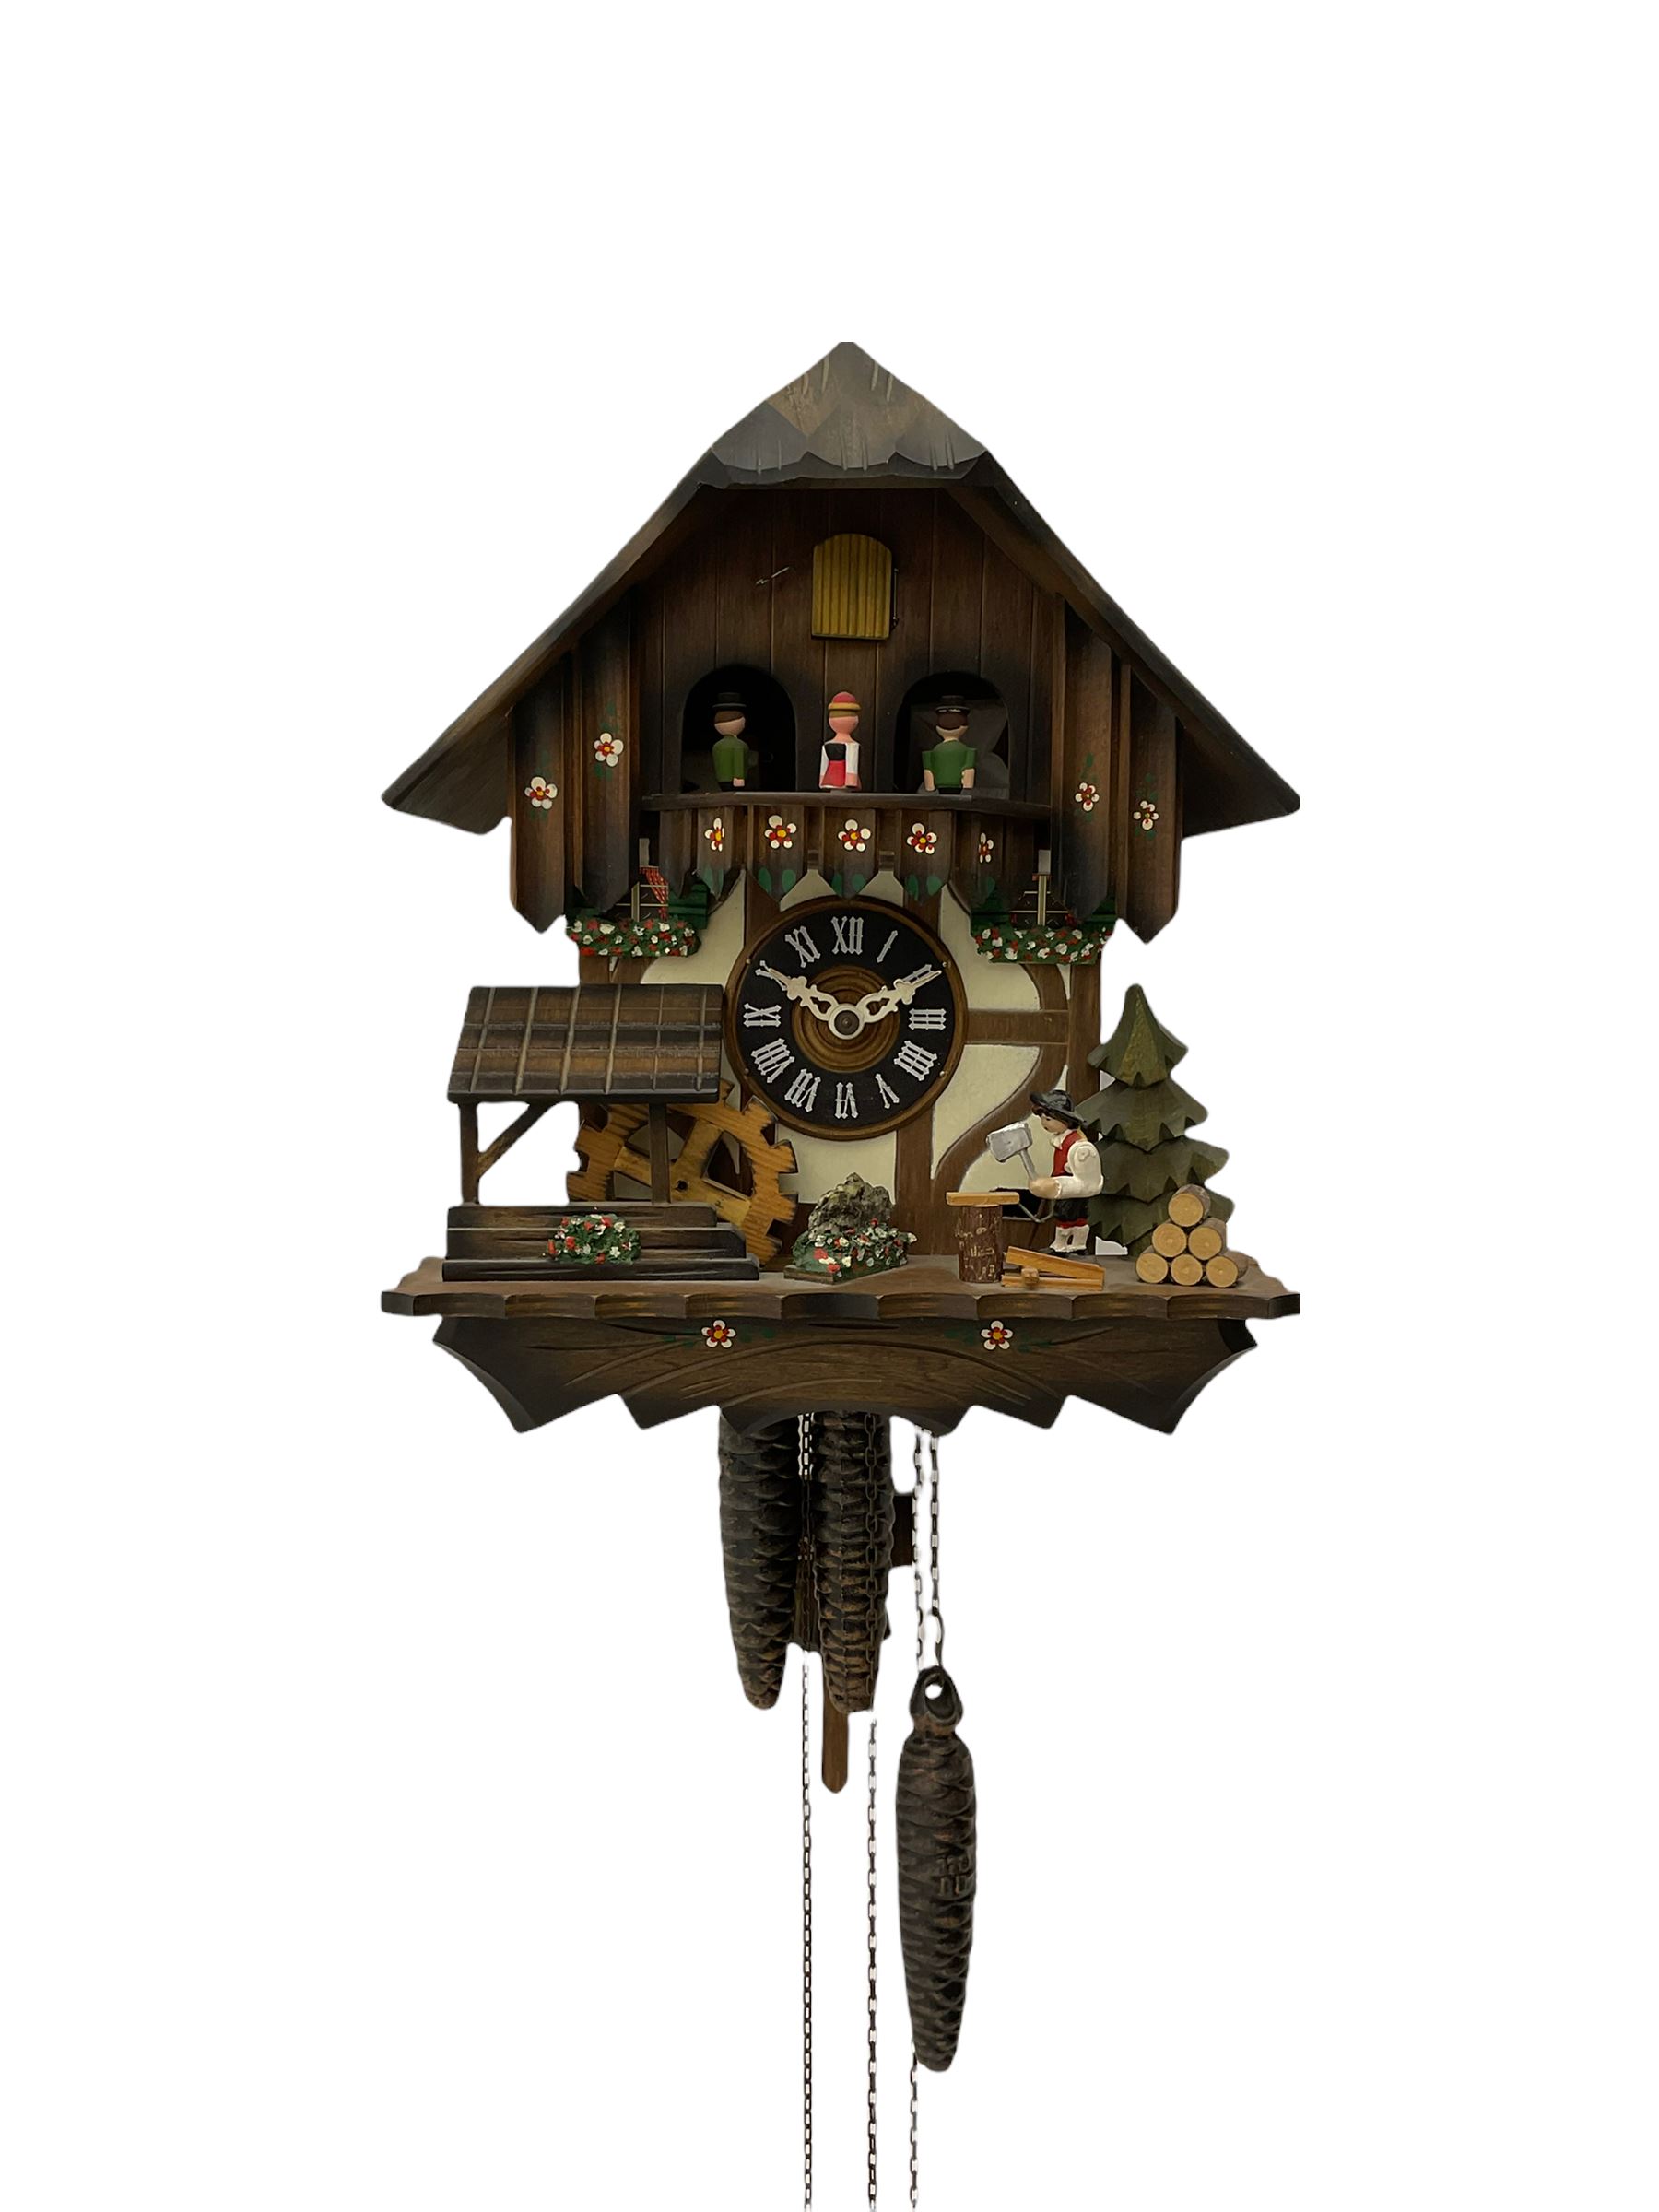 A 20th century West German 30-hour Automaton musical cuckoo clock with a Swiss musical movement play